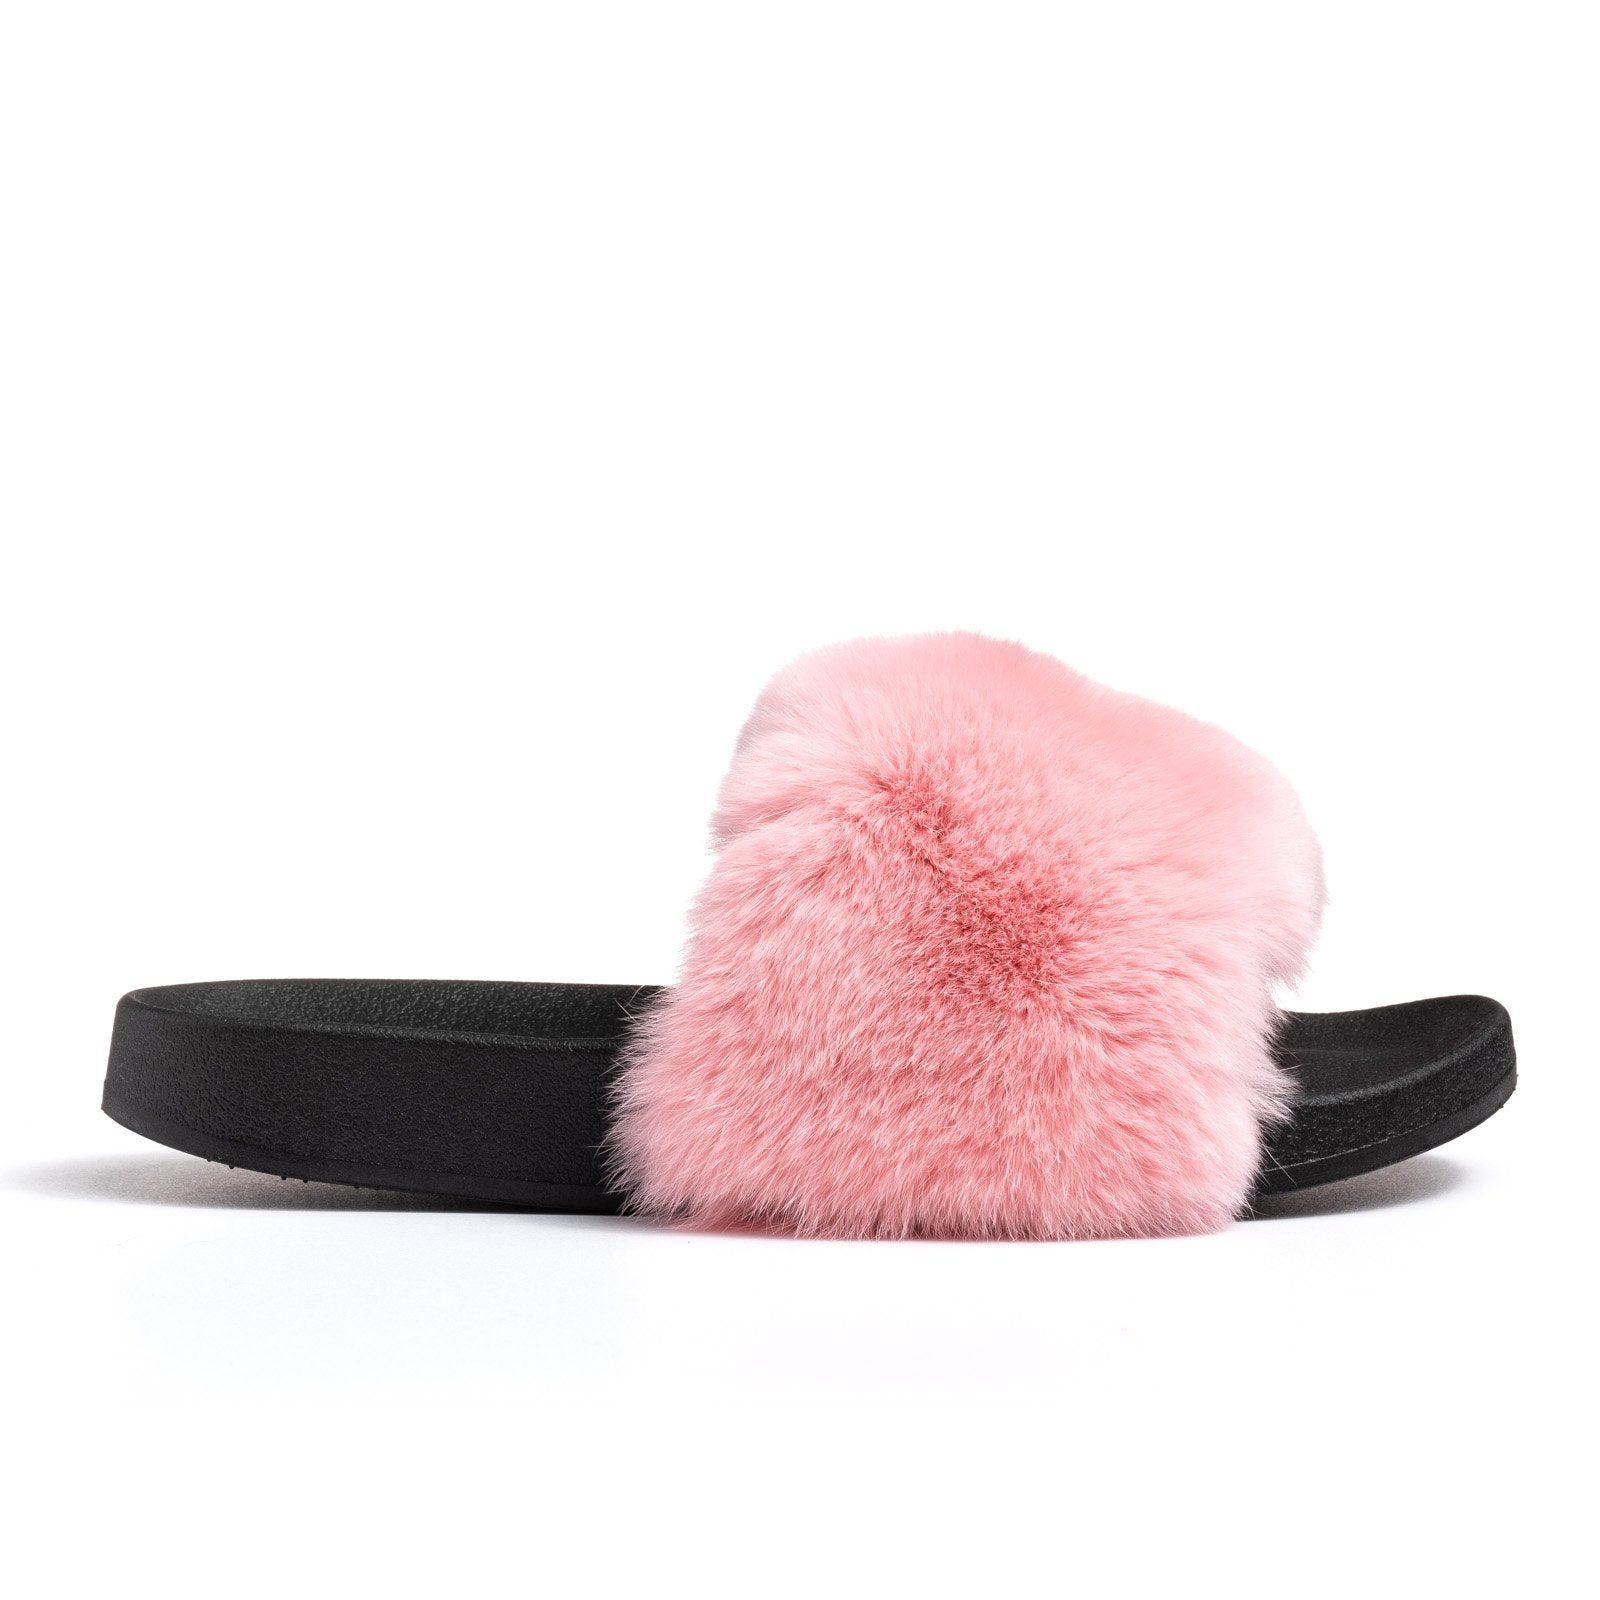 Pink Real Mink Fur Slides Slippers Sandals Comfy Personalized gift for her